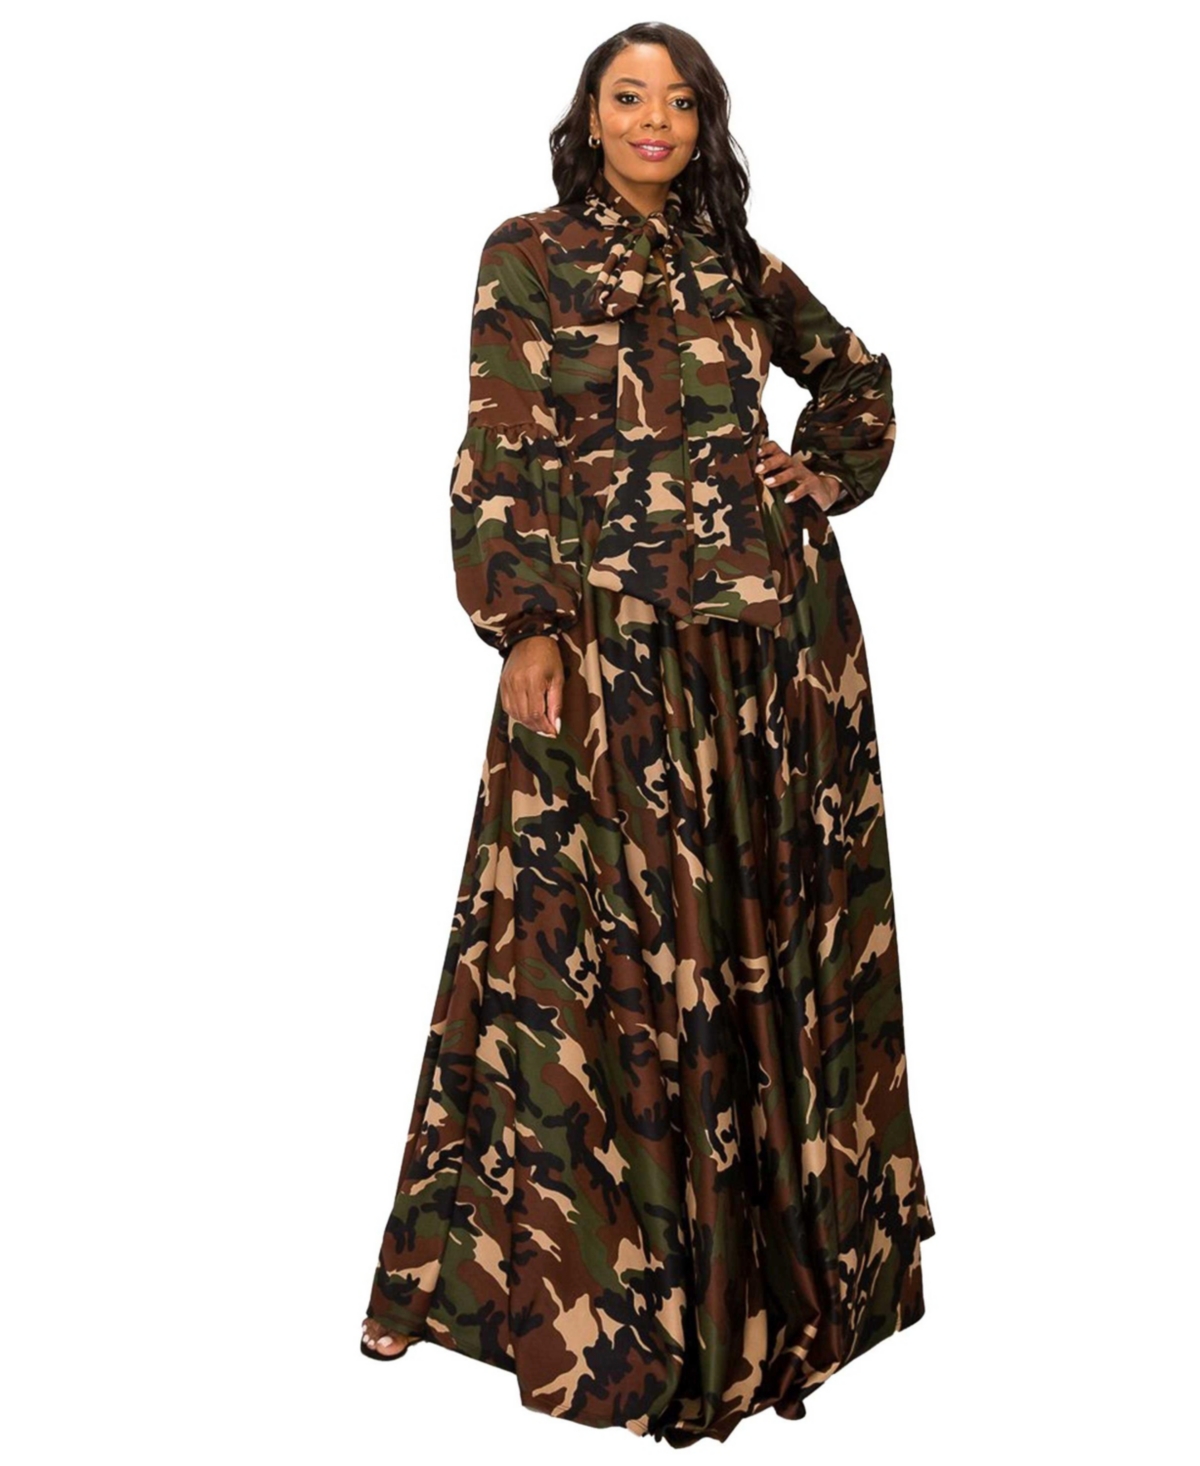 Plus Size Camo Bella Donna Dress with Ribbon and Puffed Out Sleeves - Camo